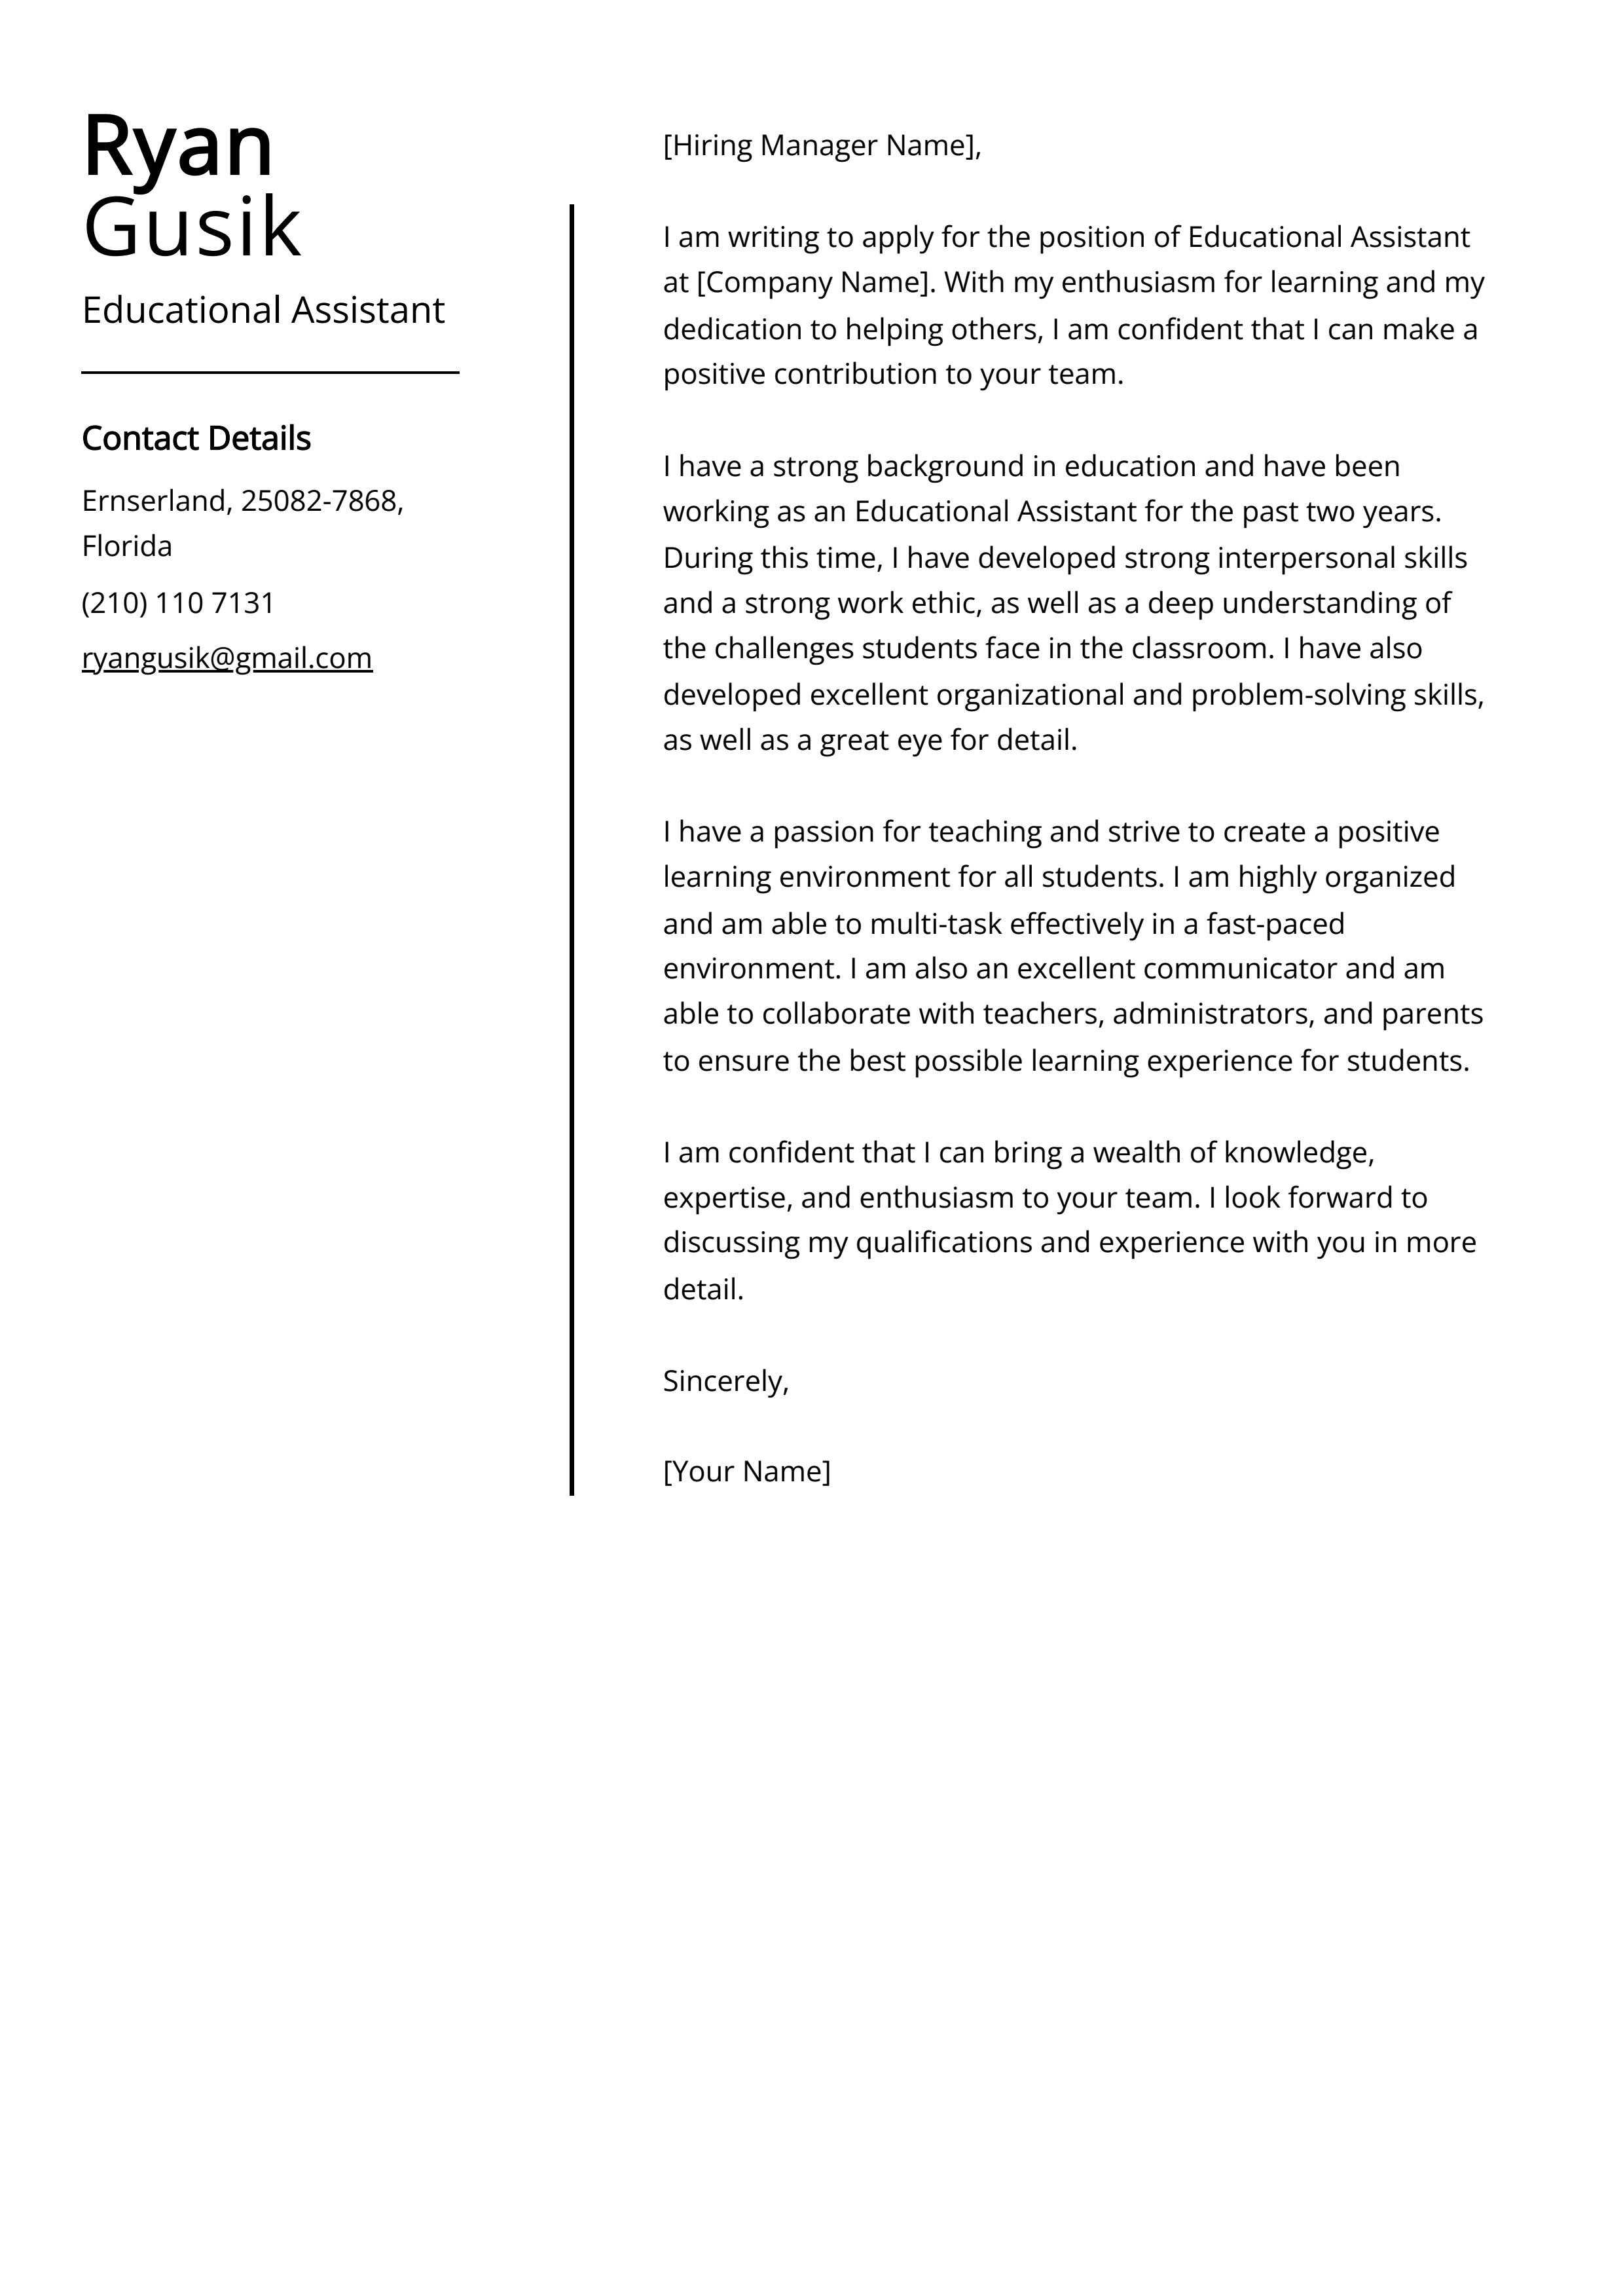 Educational Assistant Cover Letter Example